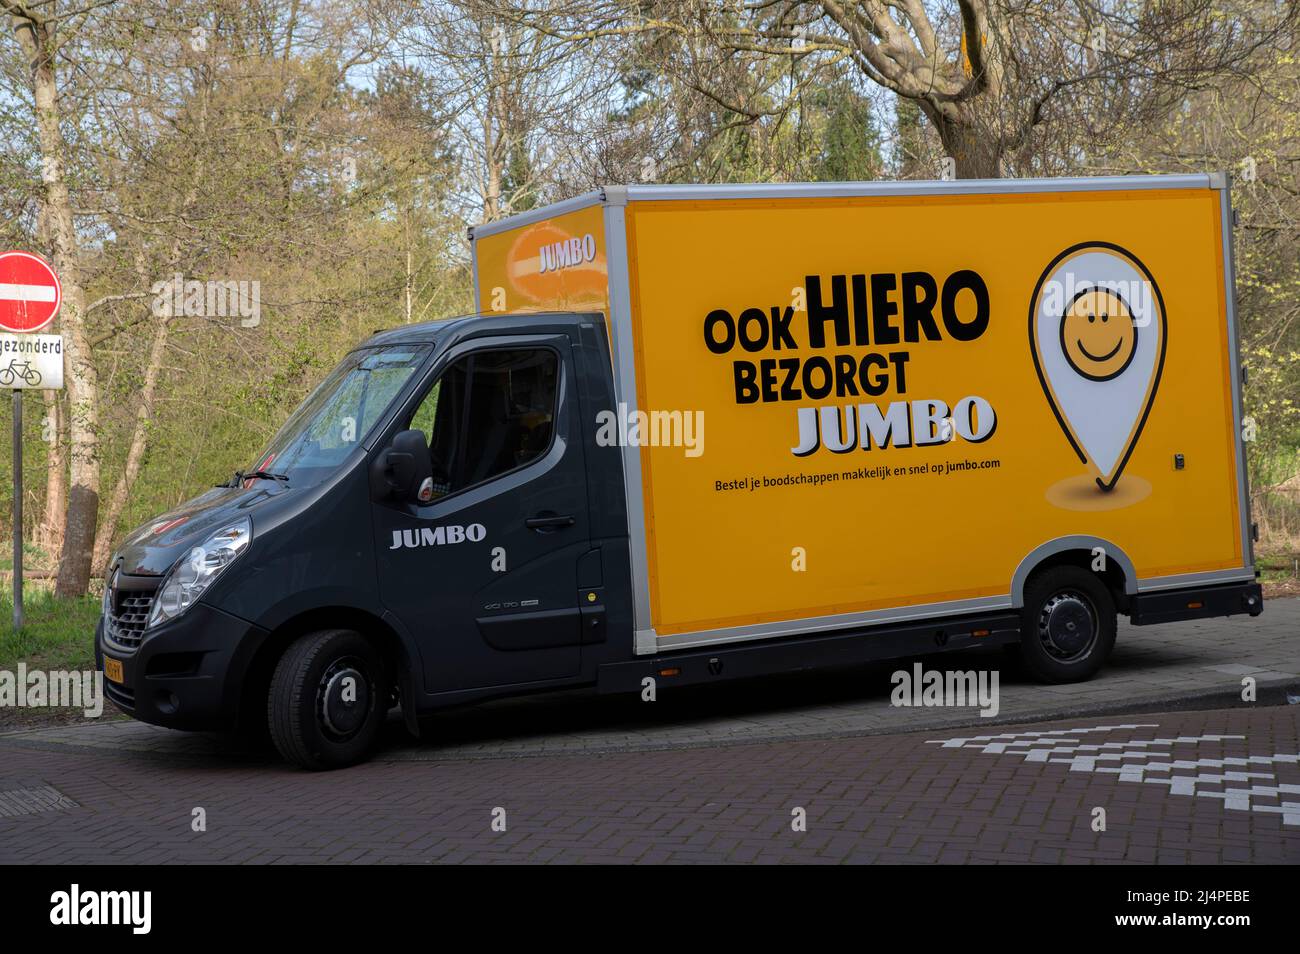 onaangenaam Polair Bezighouden Side View Jumbo Supermarket Delivery Truck At Amsterdam The Netherlands  12-4-2022 Stock Photo - Alamy